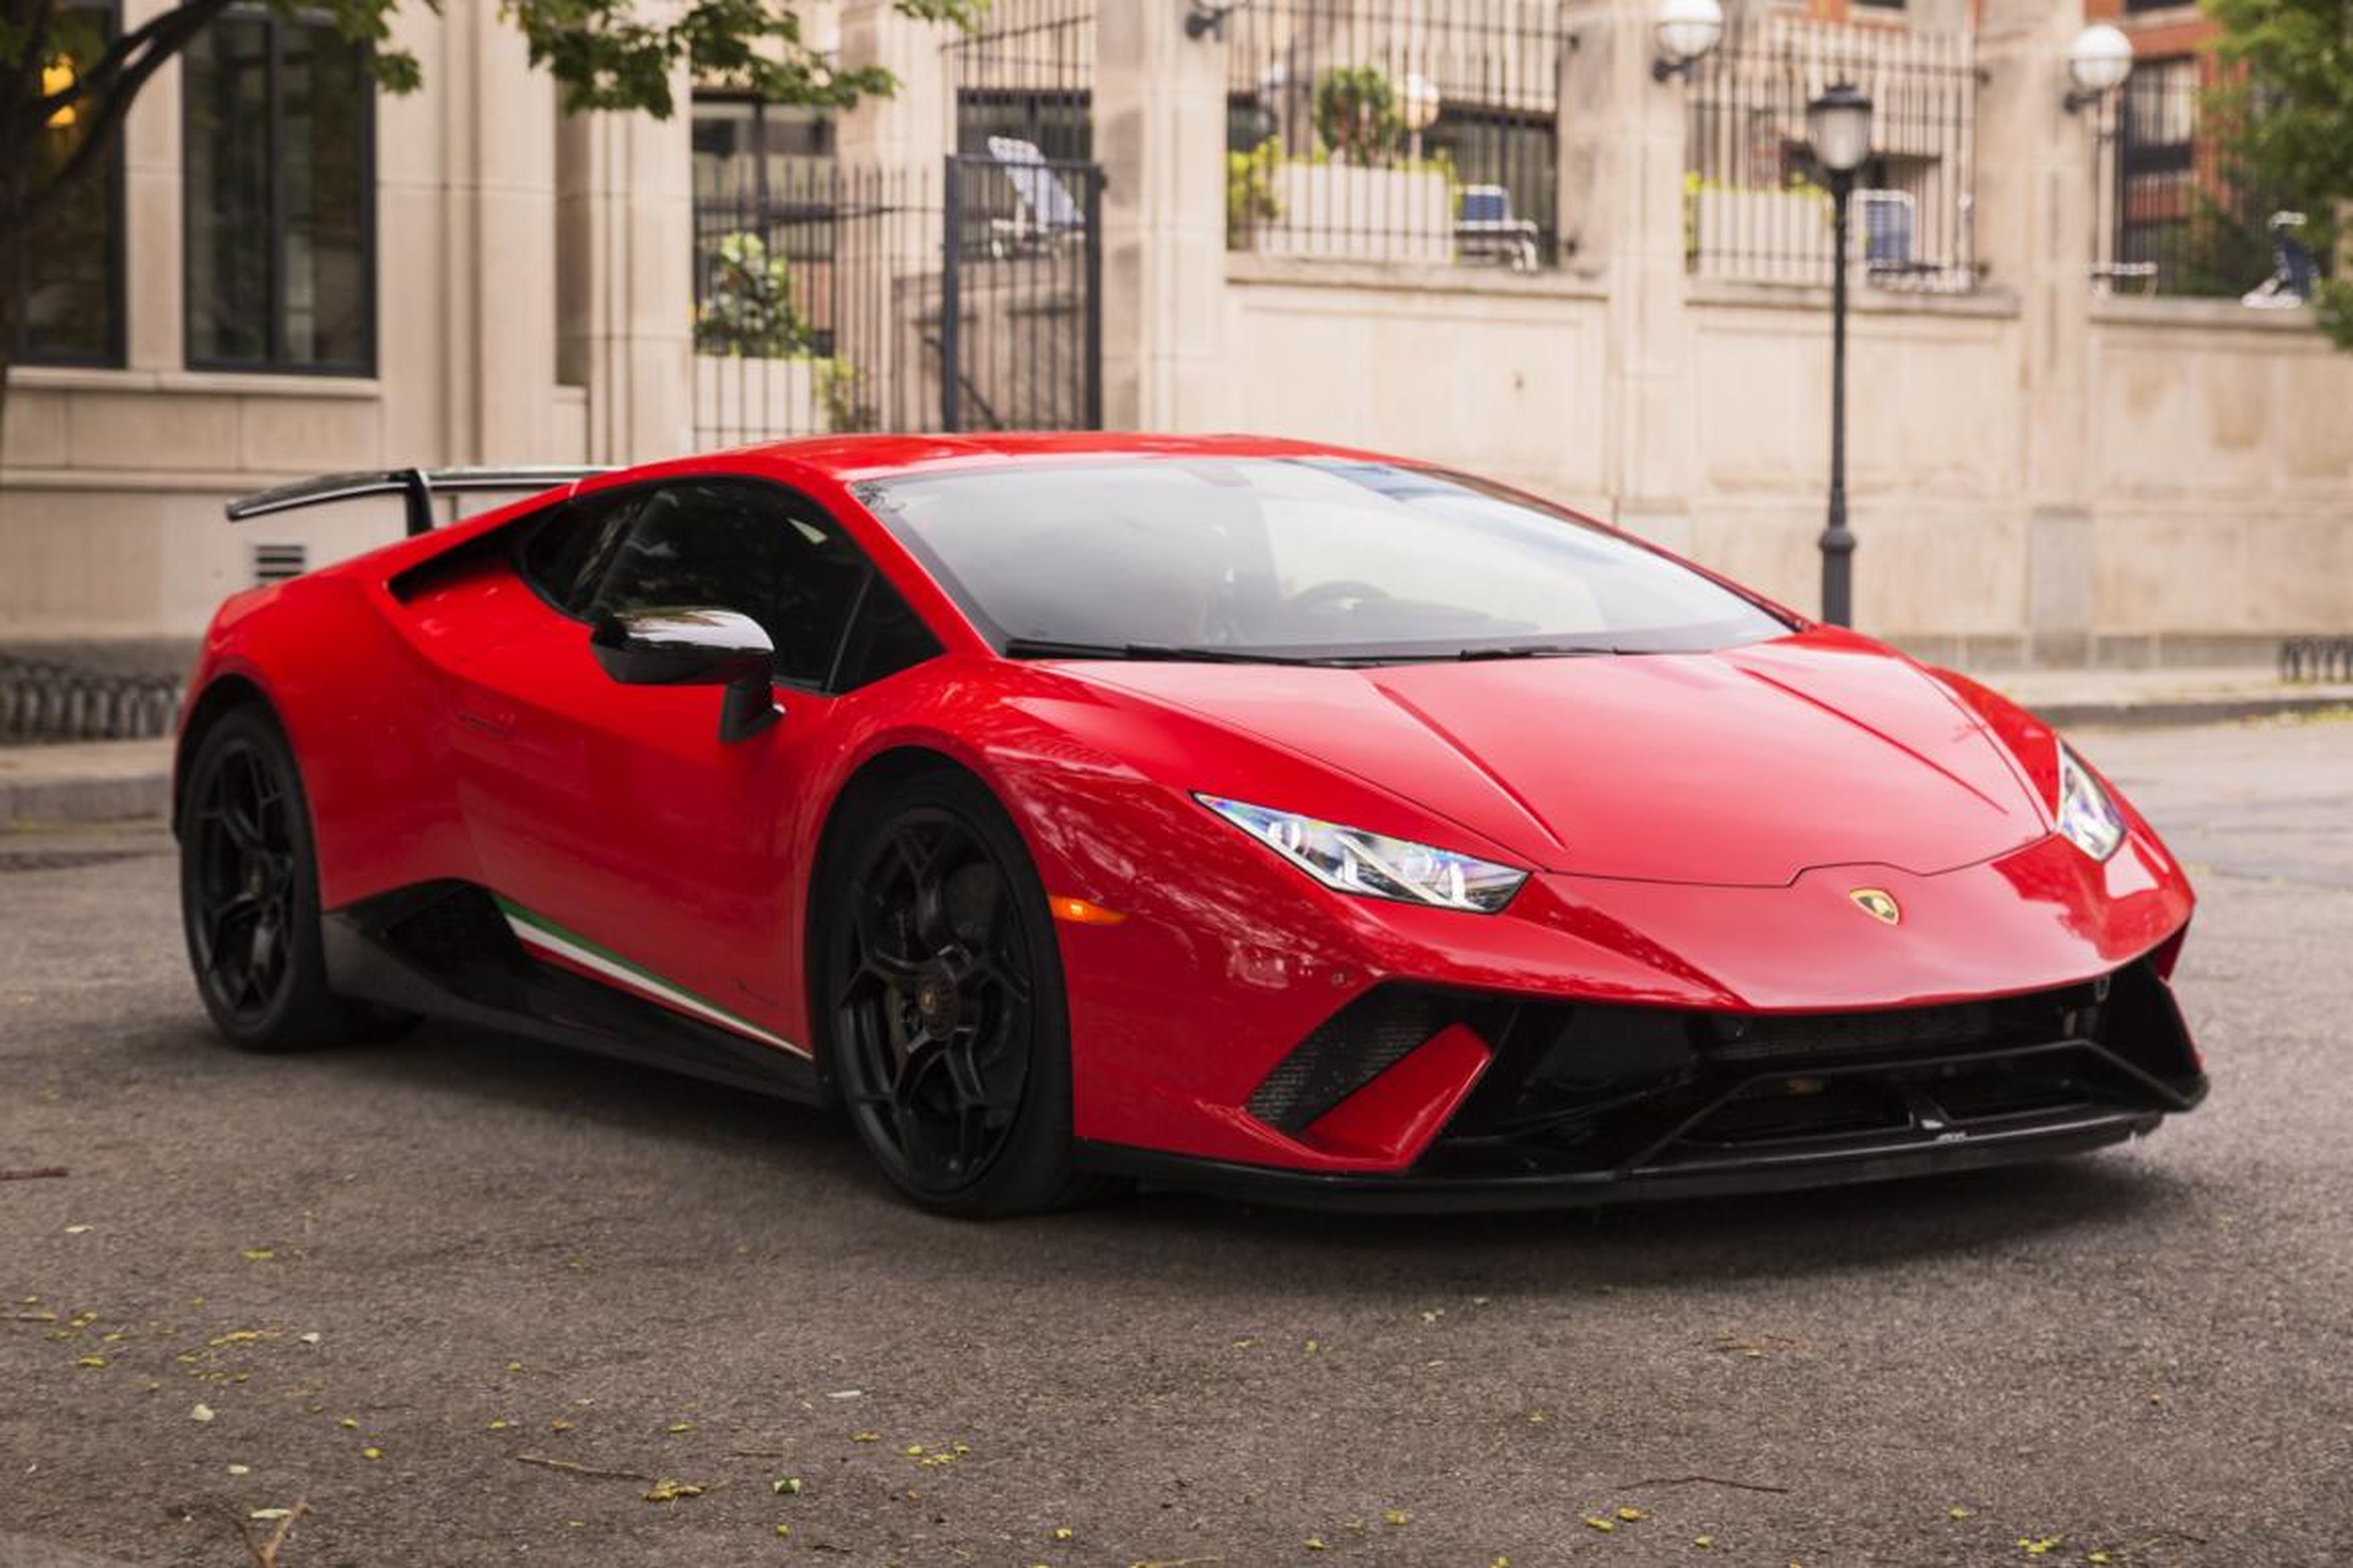 I've always been a fan of the Huracán. I think it's one of the most beautiful and purposeful Lambos. The lines and curves flow almost musically, and the music is loud without being excessively distorted.